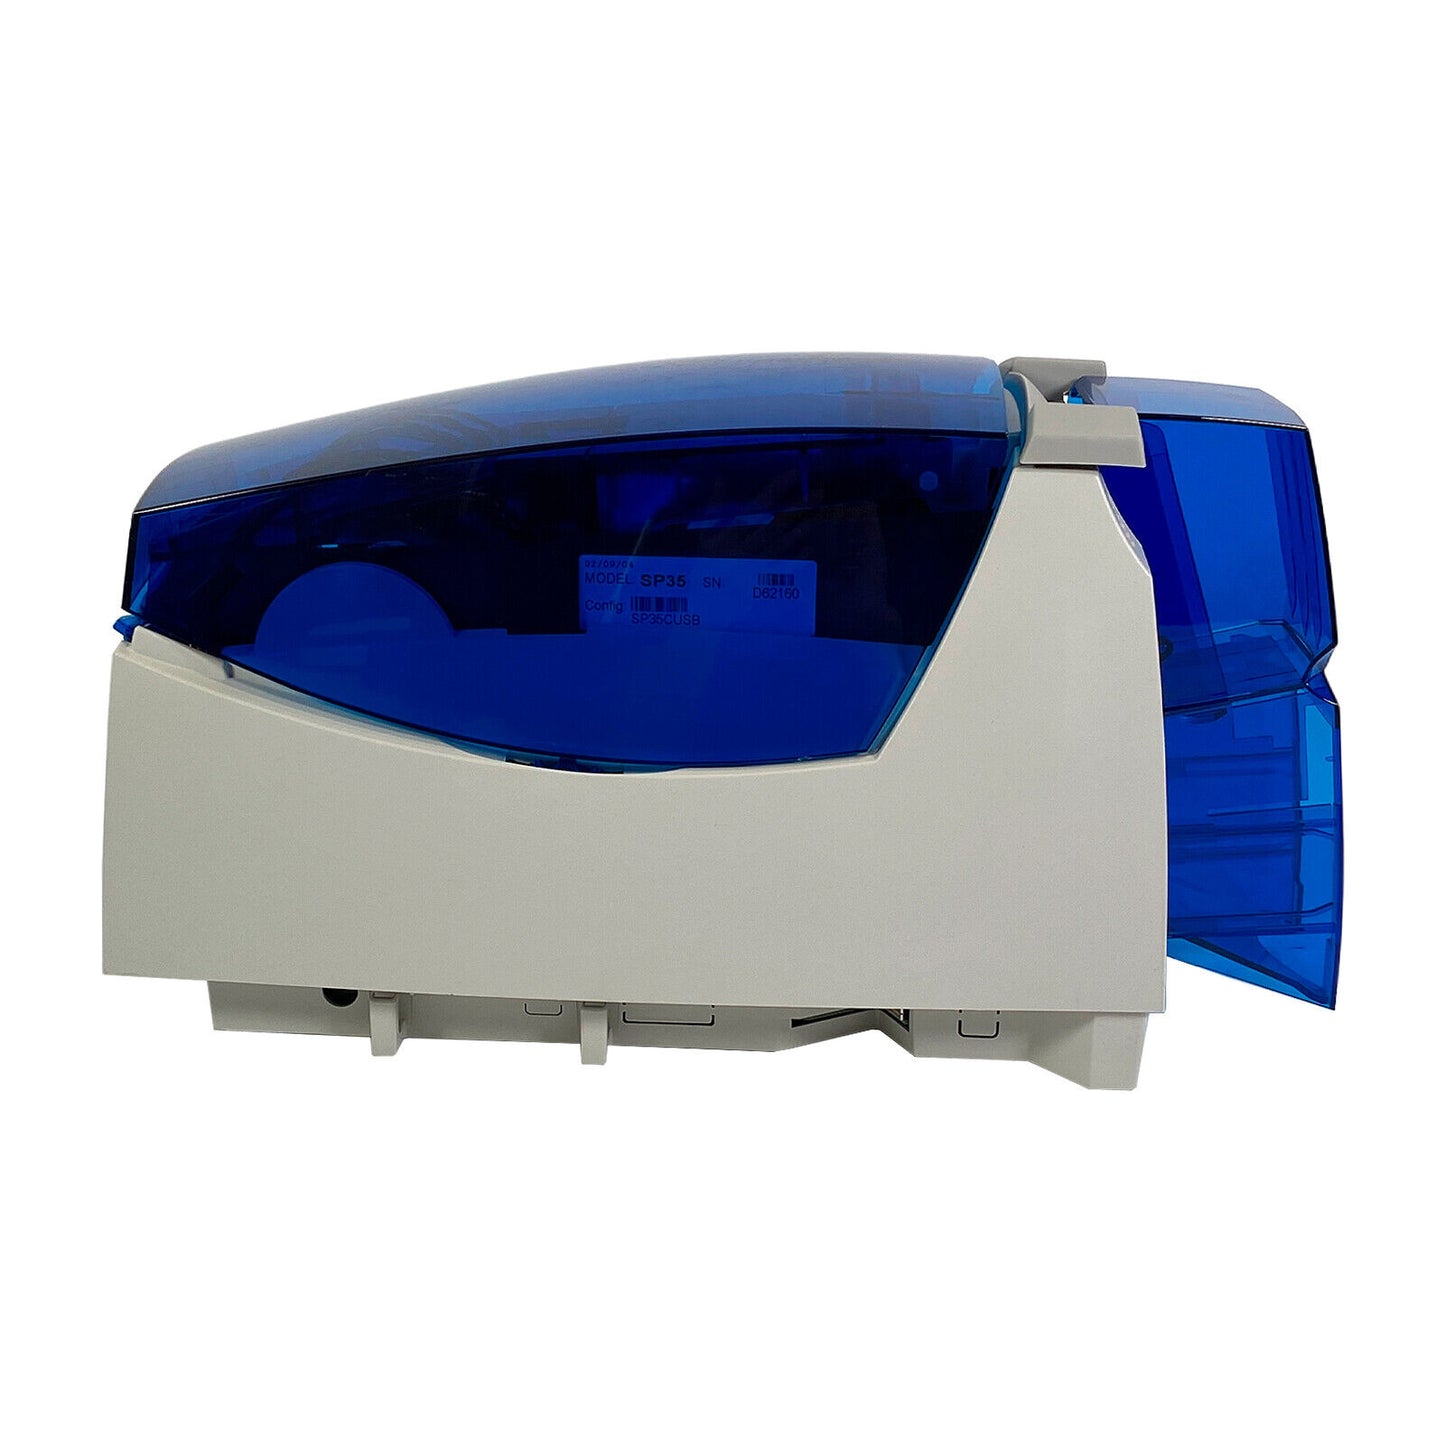 Datacard SP35 Thermal Transfer Full Color One-sided ID Card Printer